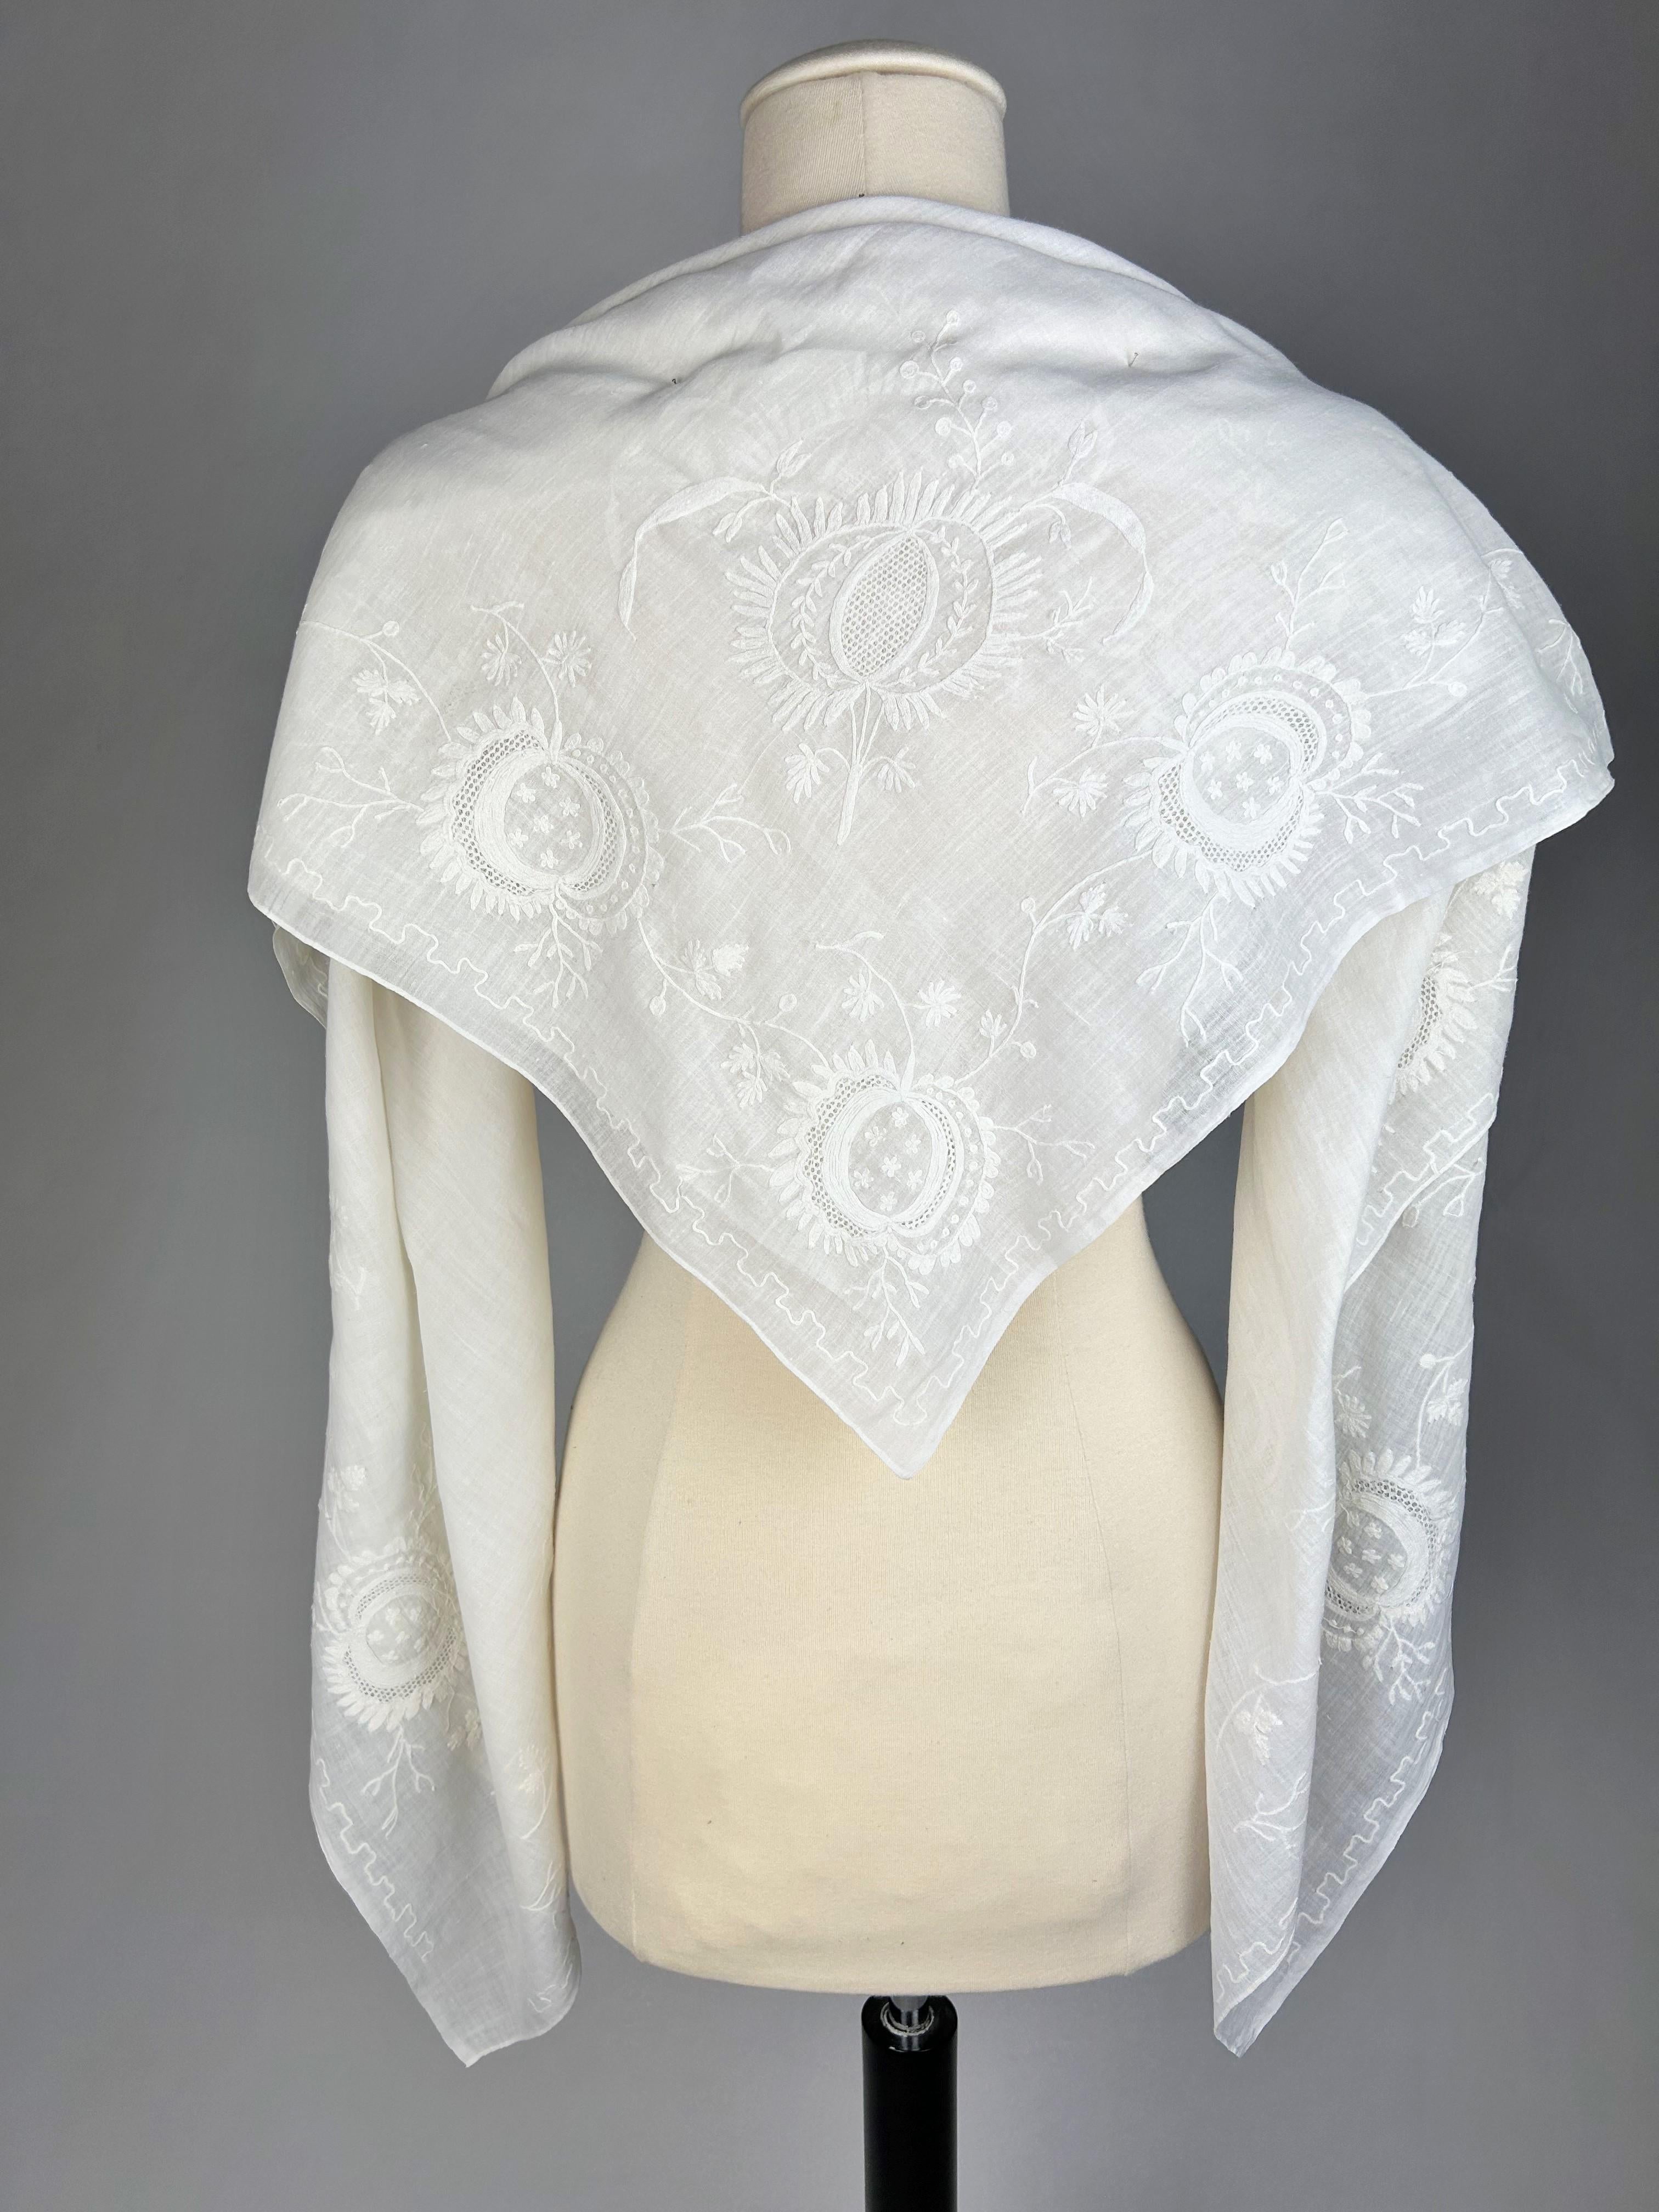 Circa 1780 /1820
France Provence

Large foldover cotton muslin fichu or shawl embroidered in Beauvais stitch and openwork with drawn threads. Elegant embroidery of foliage scrolls charged with large stylised pomegranates, and with a semis in the